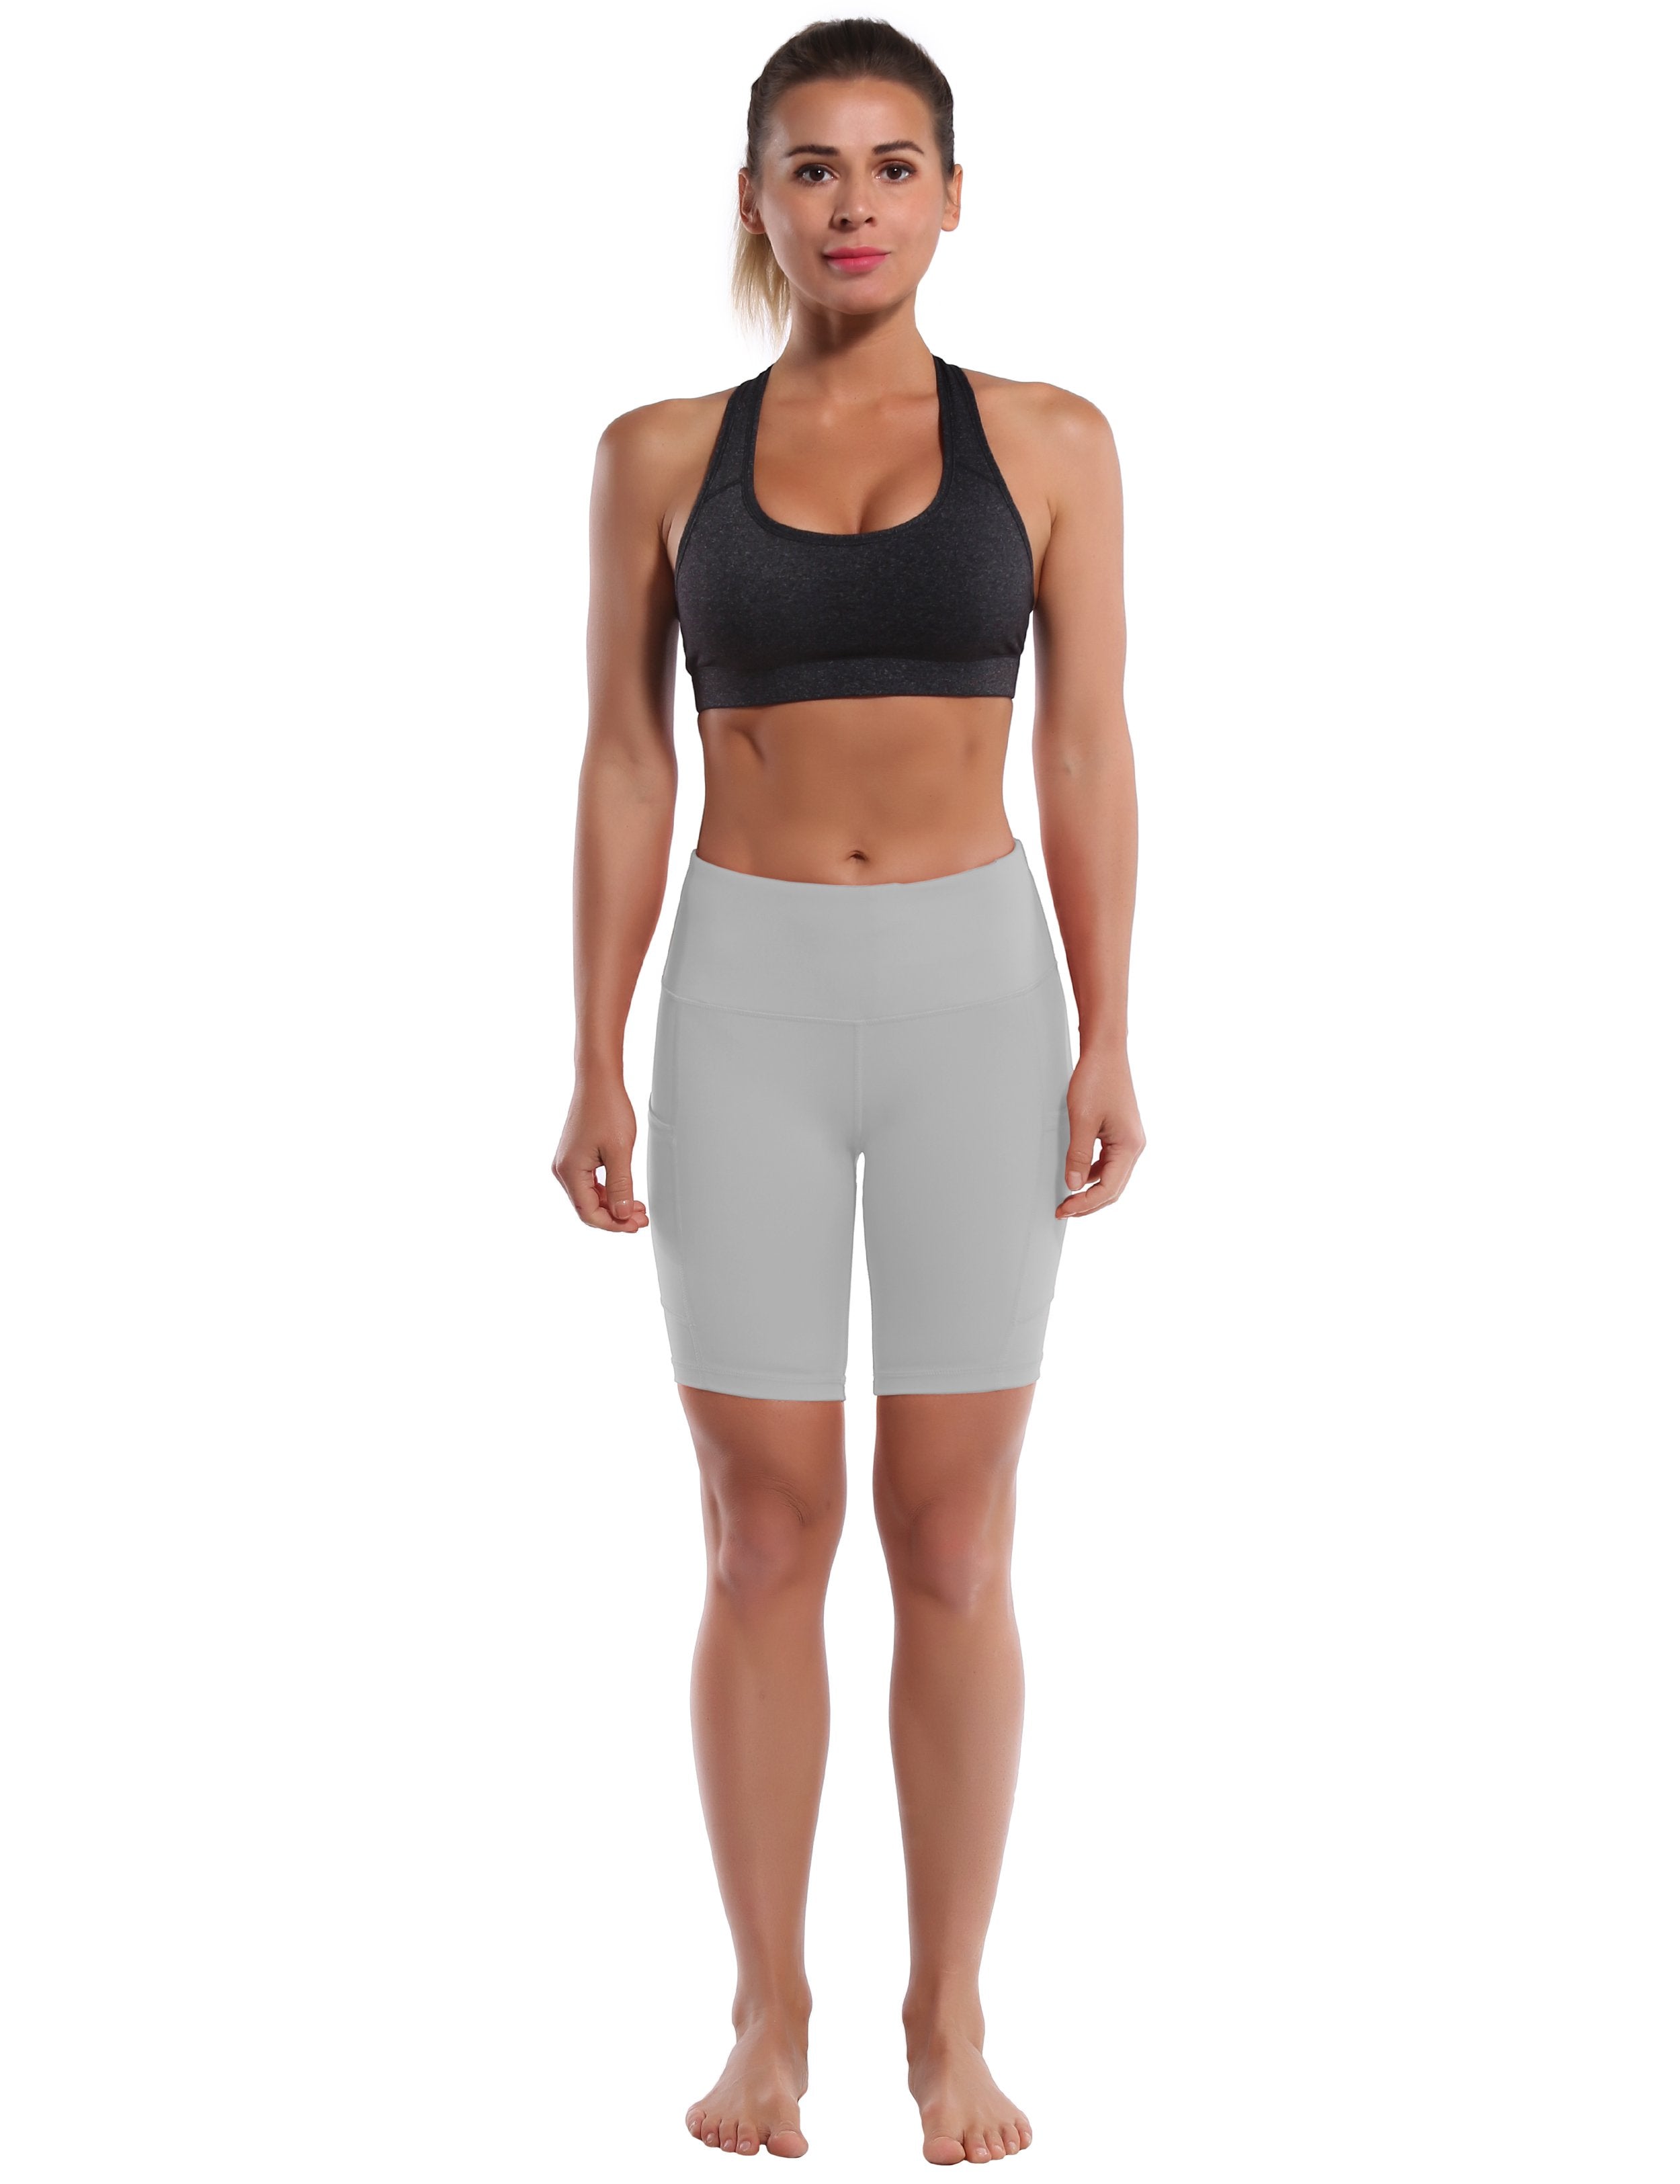 8" Side Pockets Jogging Shorts lightgray Sleek, soft, smooth and totally comfortable: our newest style is here. Softest-ever fabric High elasticity High density 4-way stretch Fabric doesn't attract lint easily No see-through Moisture-wicking Machine wash 75% Nylon, 25% Spandex